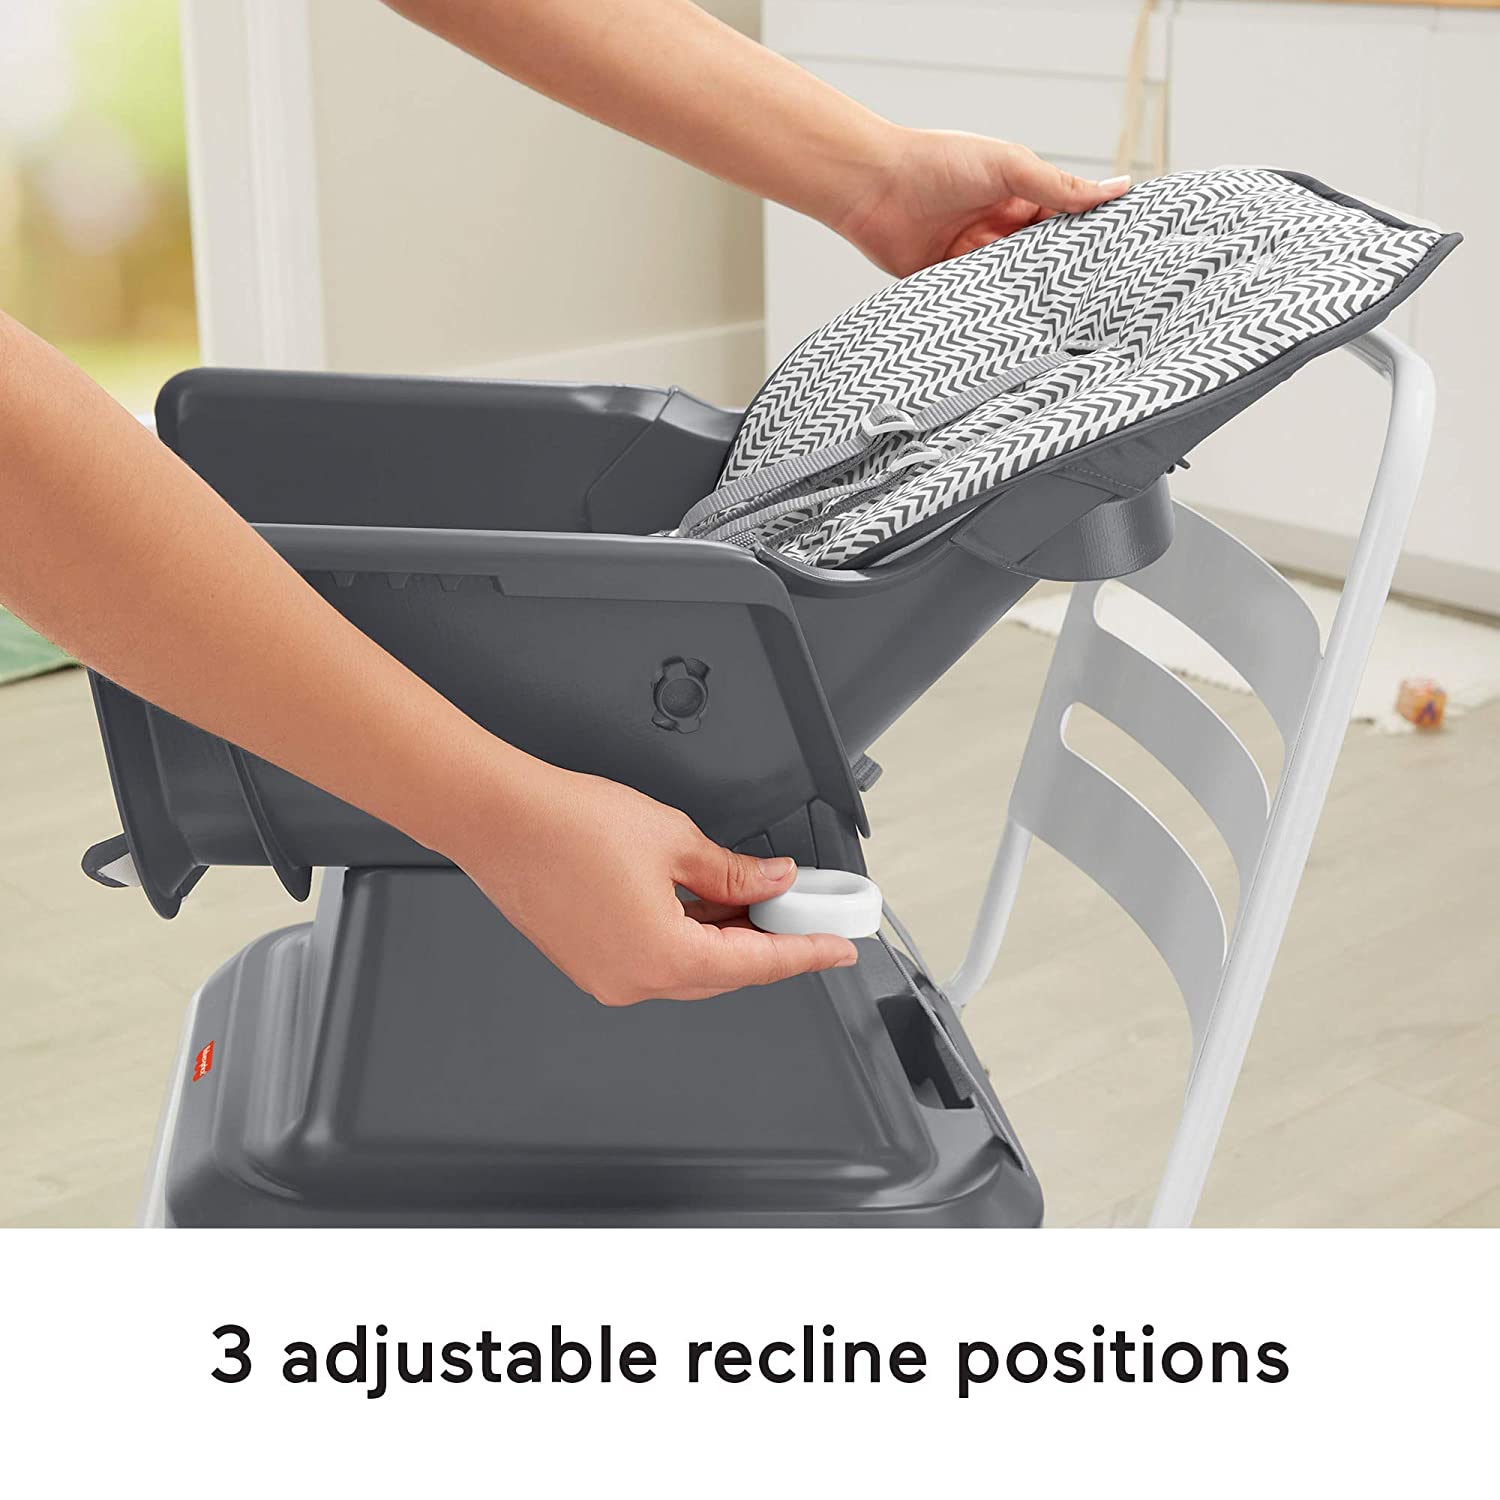 Fisher-Price SpaceSaver Simple Clean High Chair, Pencil Strokes Arrows Tire Tracks -  Portable for Baby-to-Toddler Dining Chair